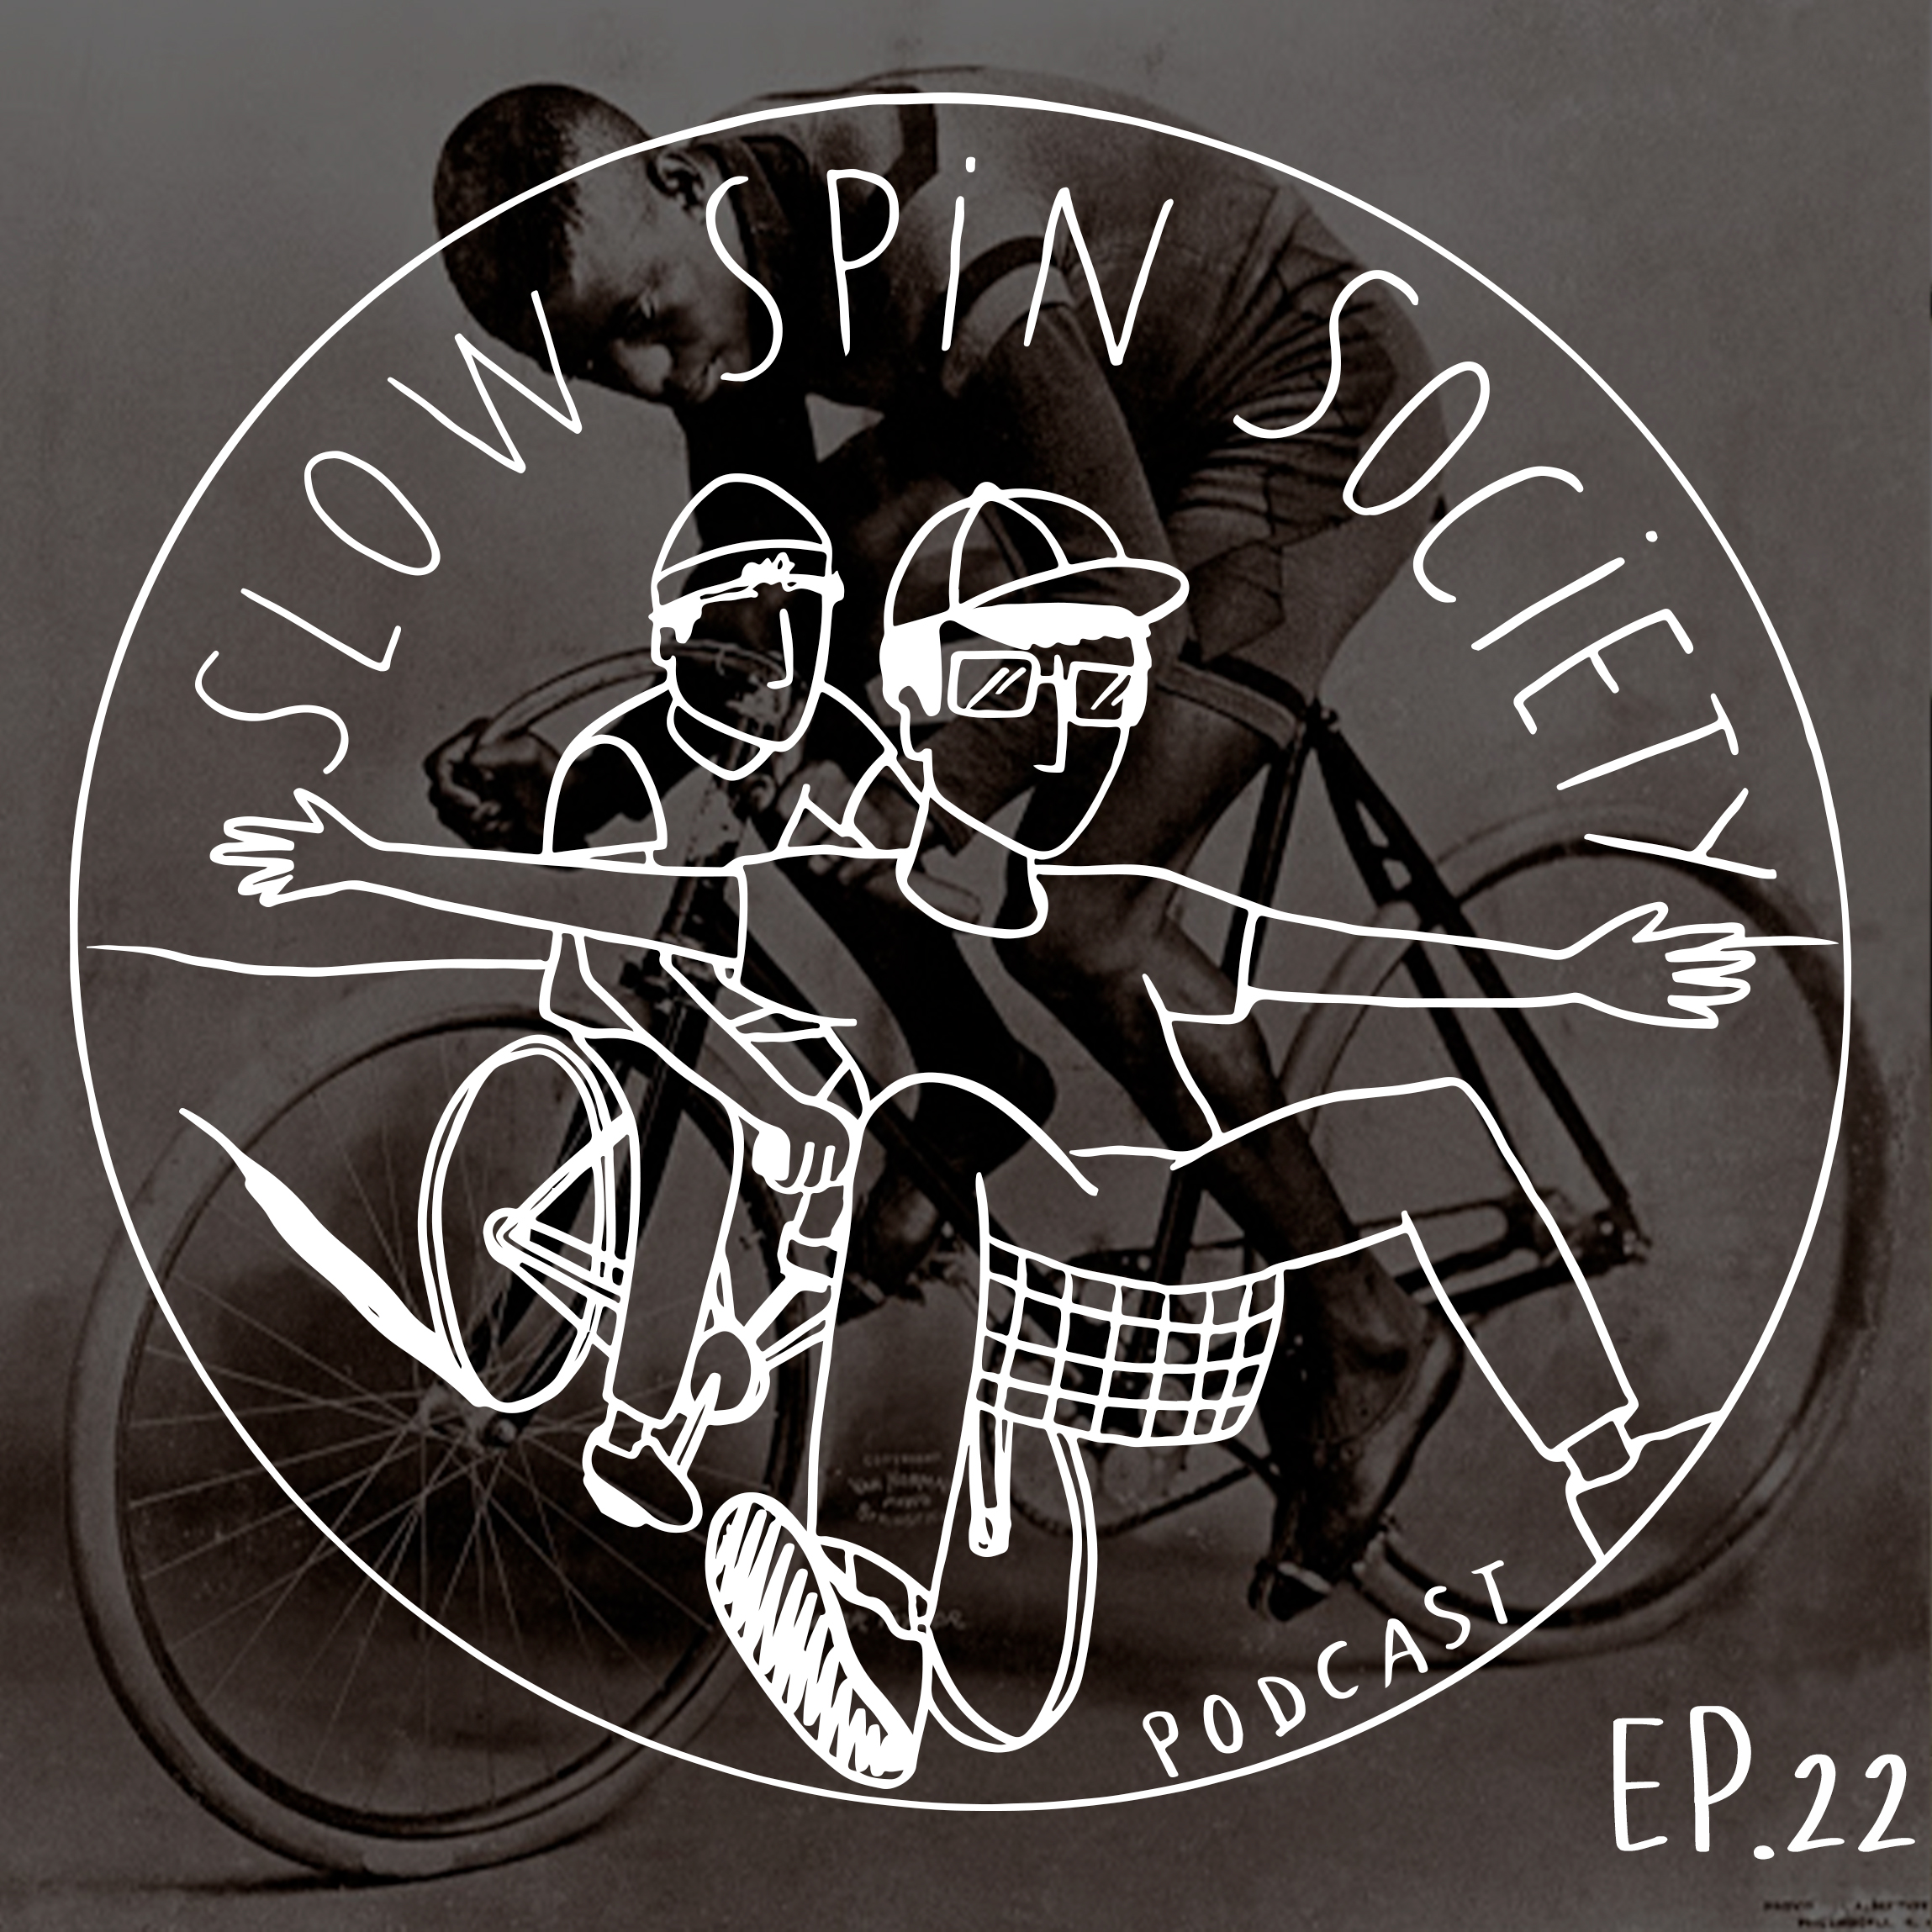 The Slow Spin Society Podcast Ep.22 : First African-American Cycling Superstar - The incredible story of Major Taylor.